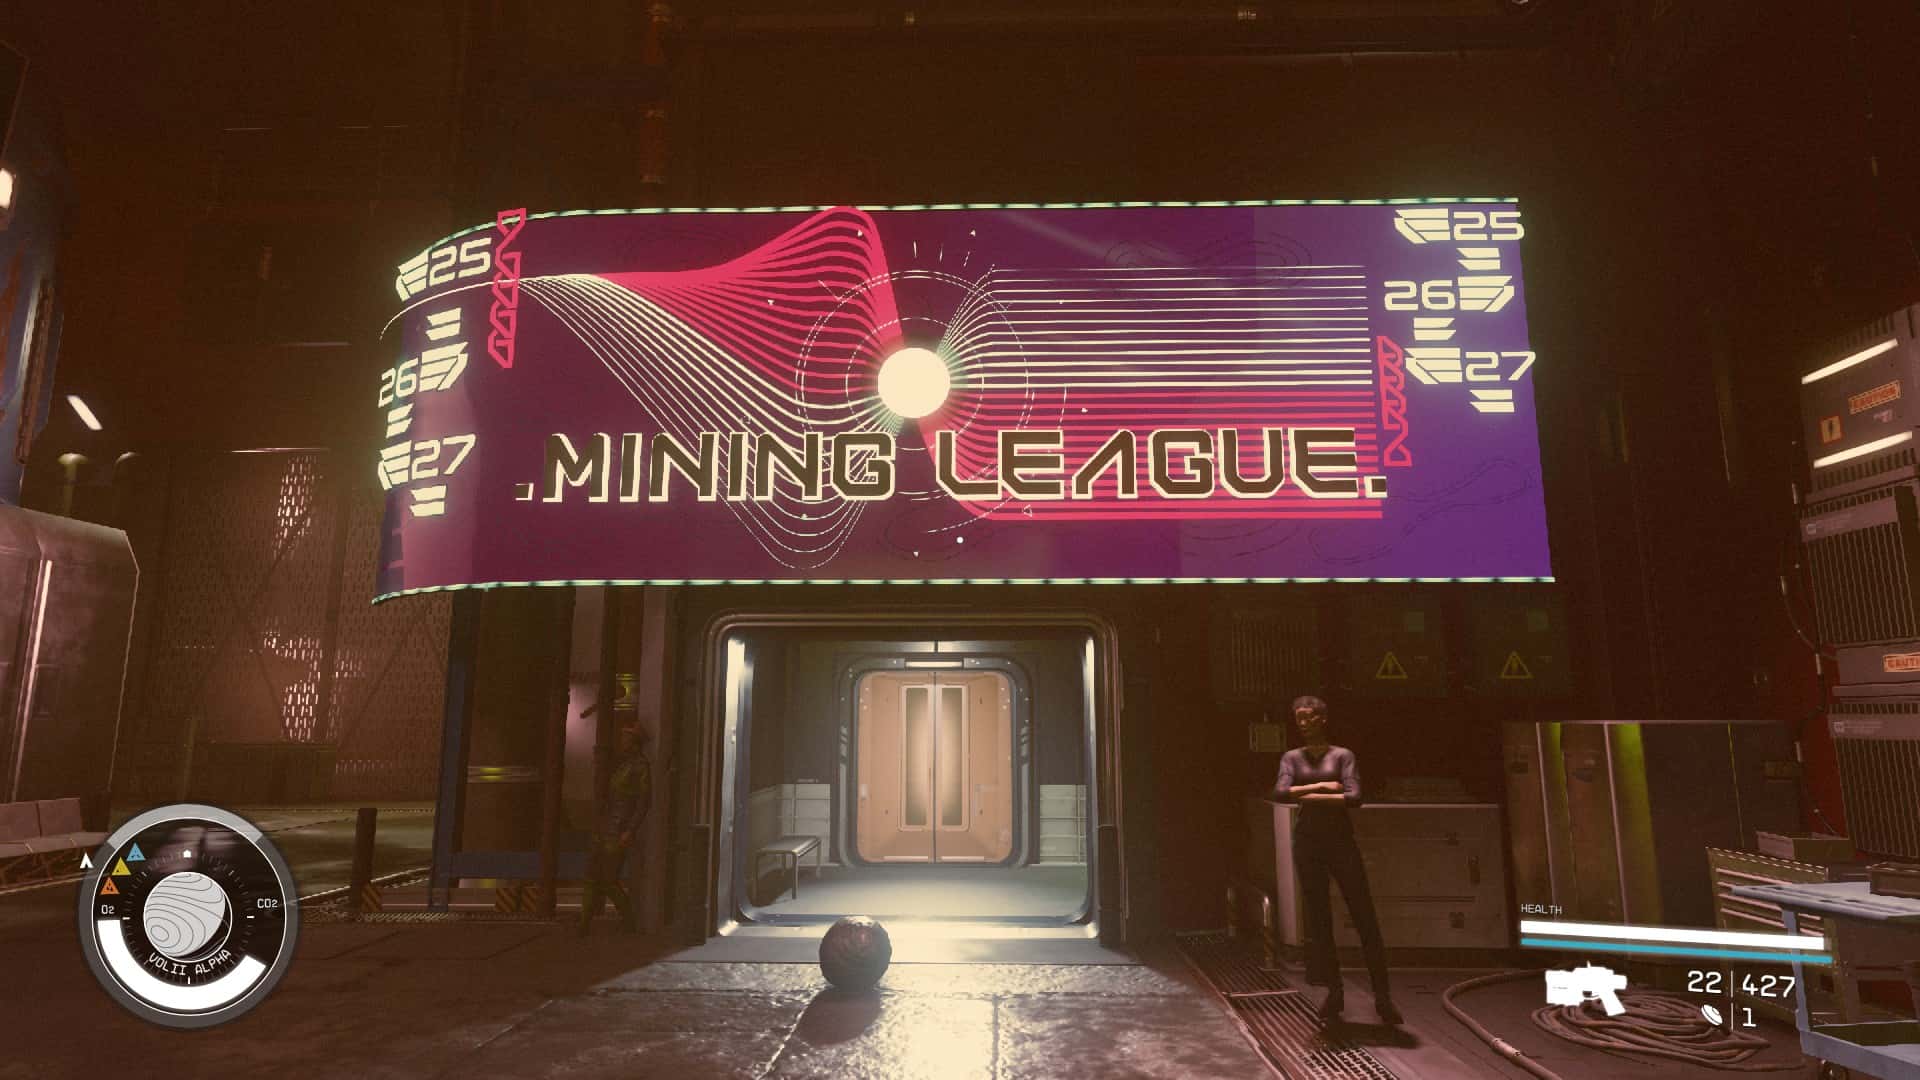 Starfield Neon shops: The front of the Mining League shop.